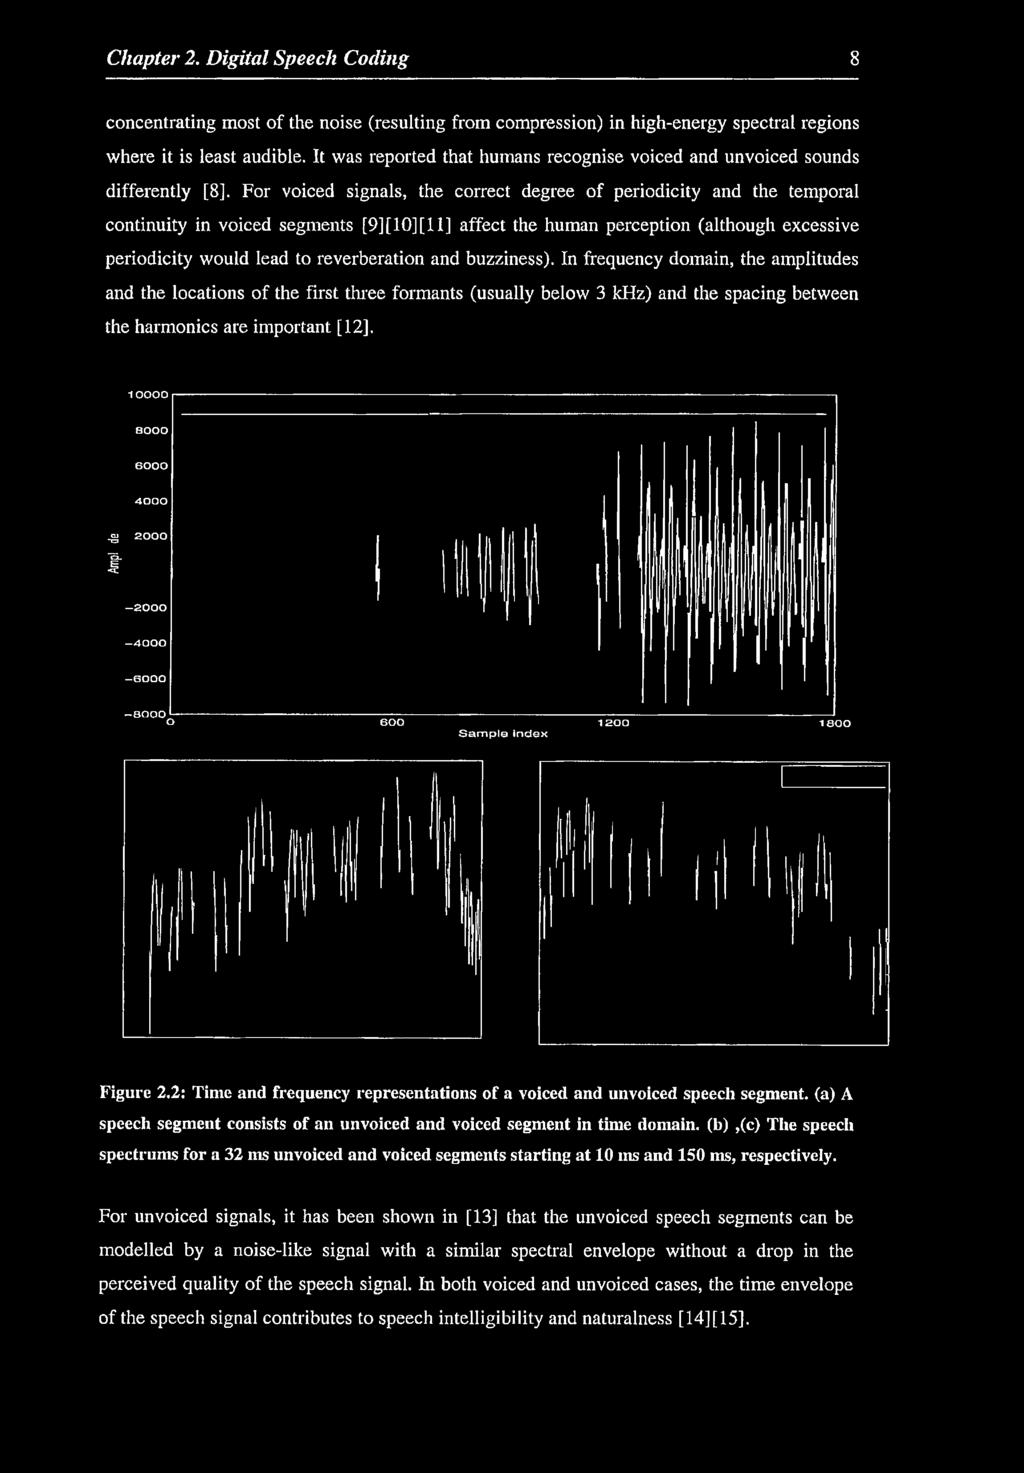 For voiced signals, the correct degree of periodicity and the temporal continuity in voiced segments [9] [10] [11] affect the human perception (although excessive periodicity would lead to